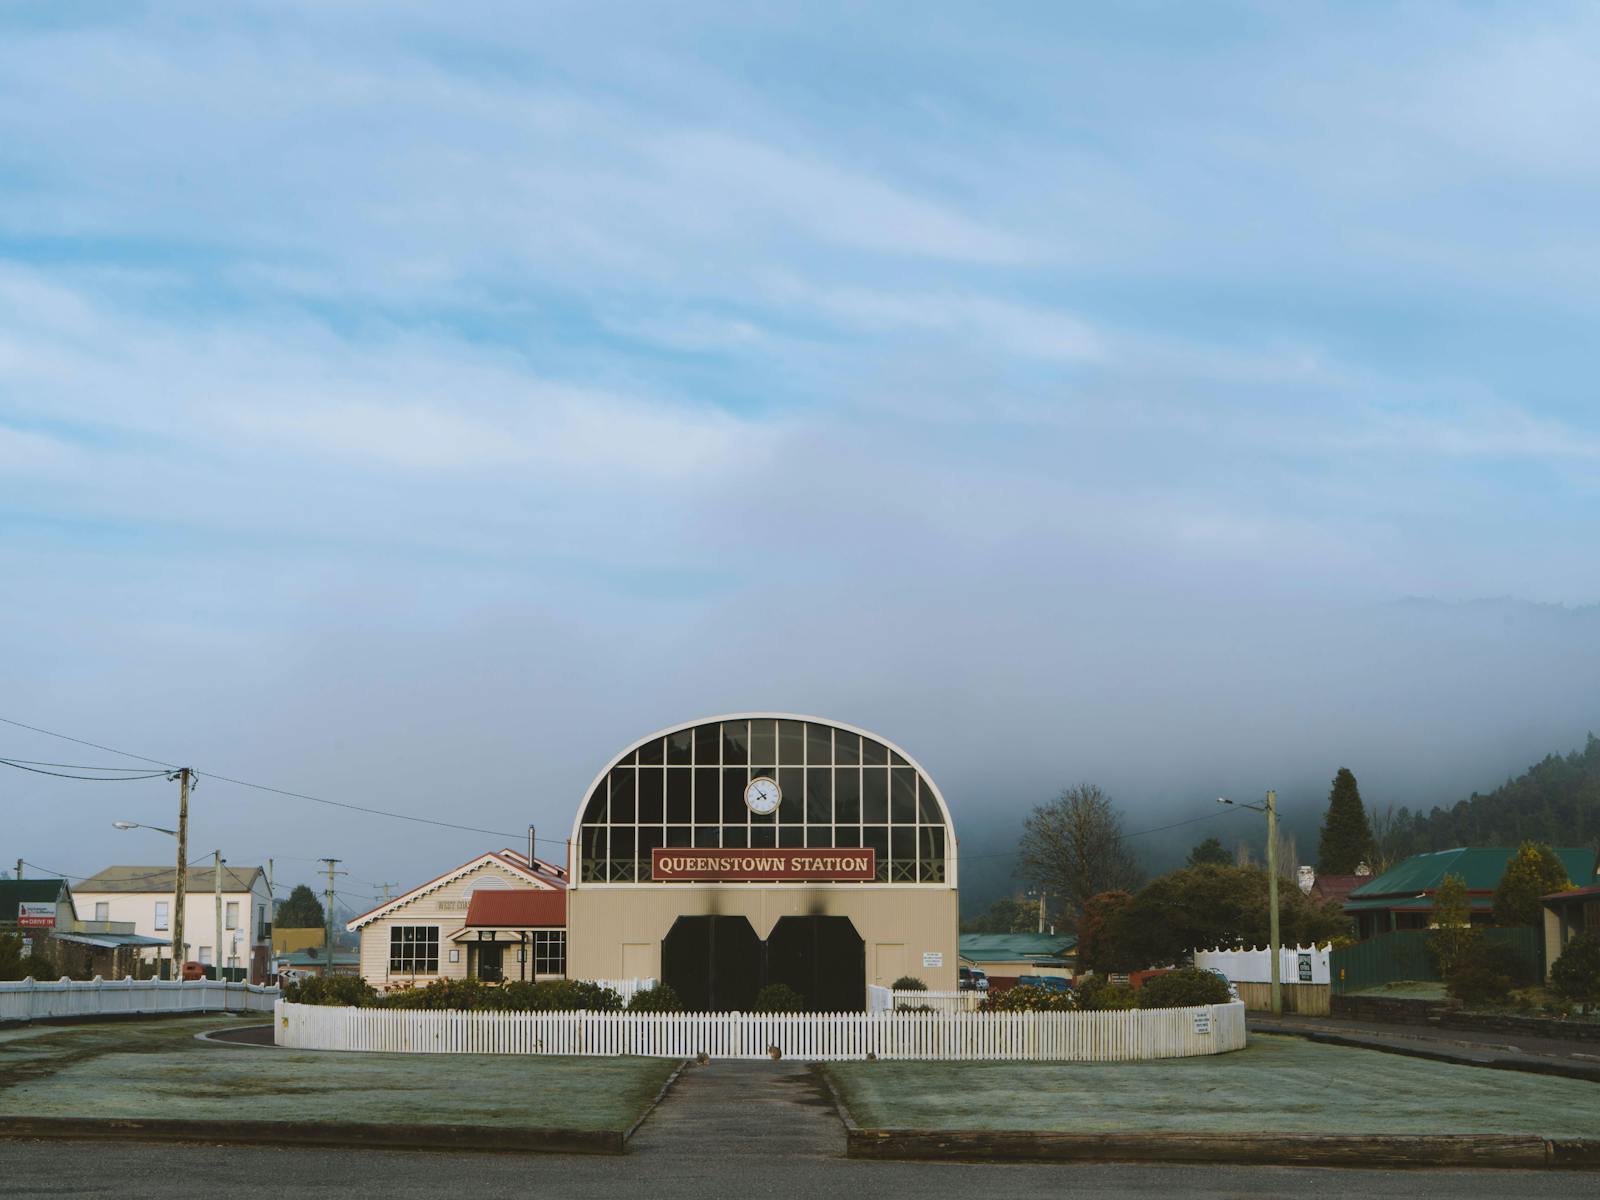 a misty morning at queenstown station, a domed building with two large doors